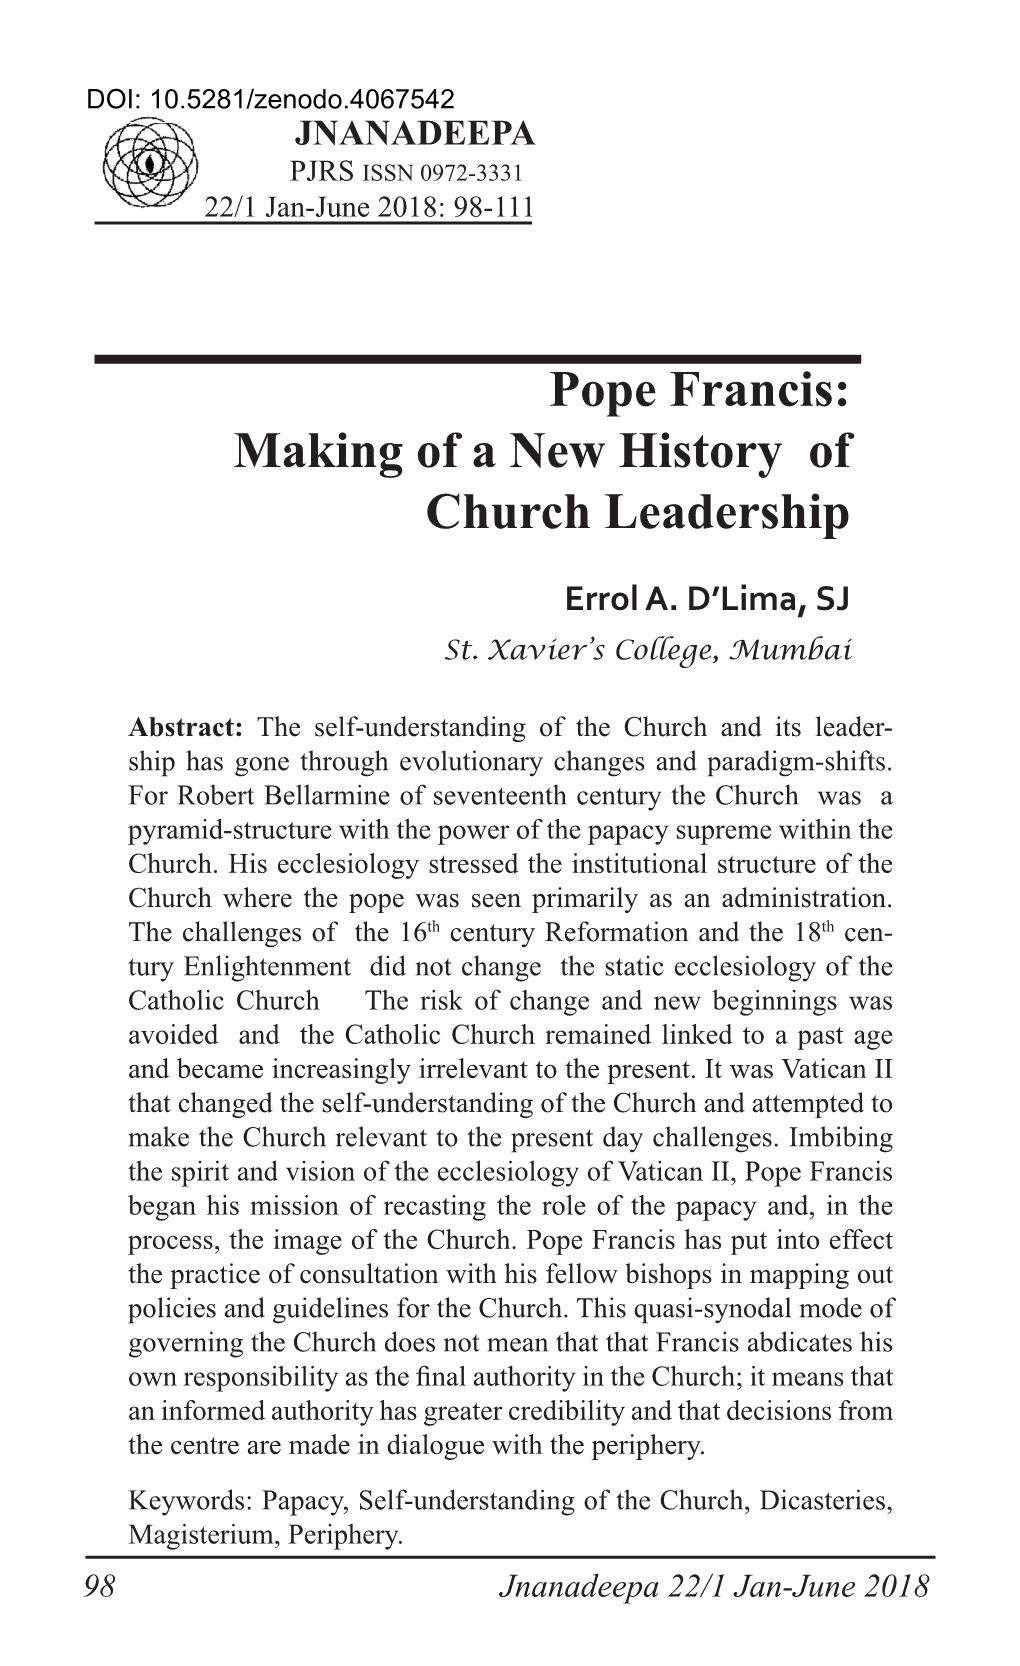 Pope Francis: Making of a New History of Church Leadership